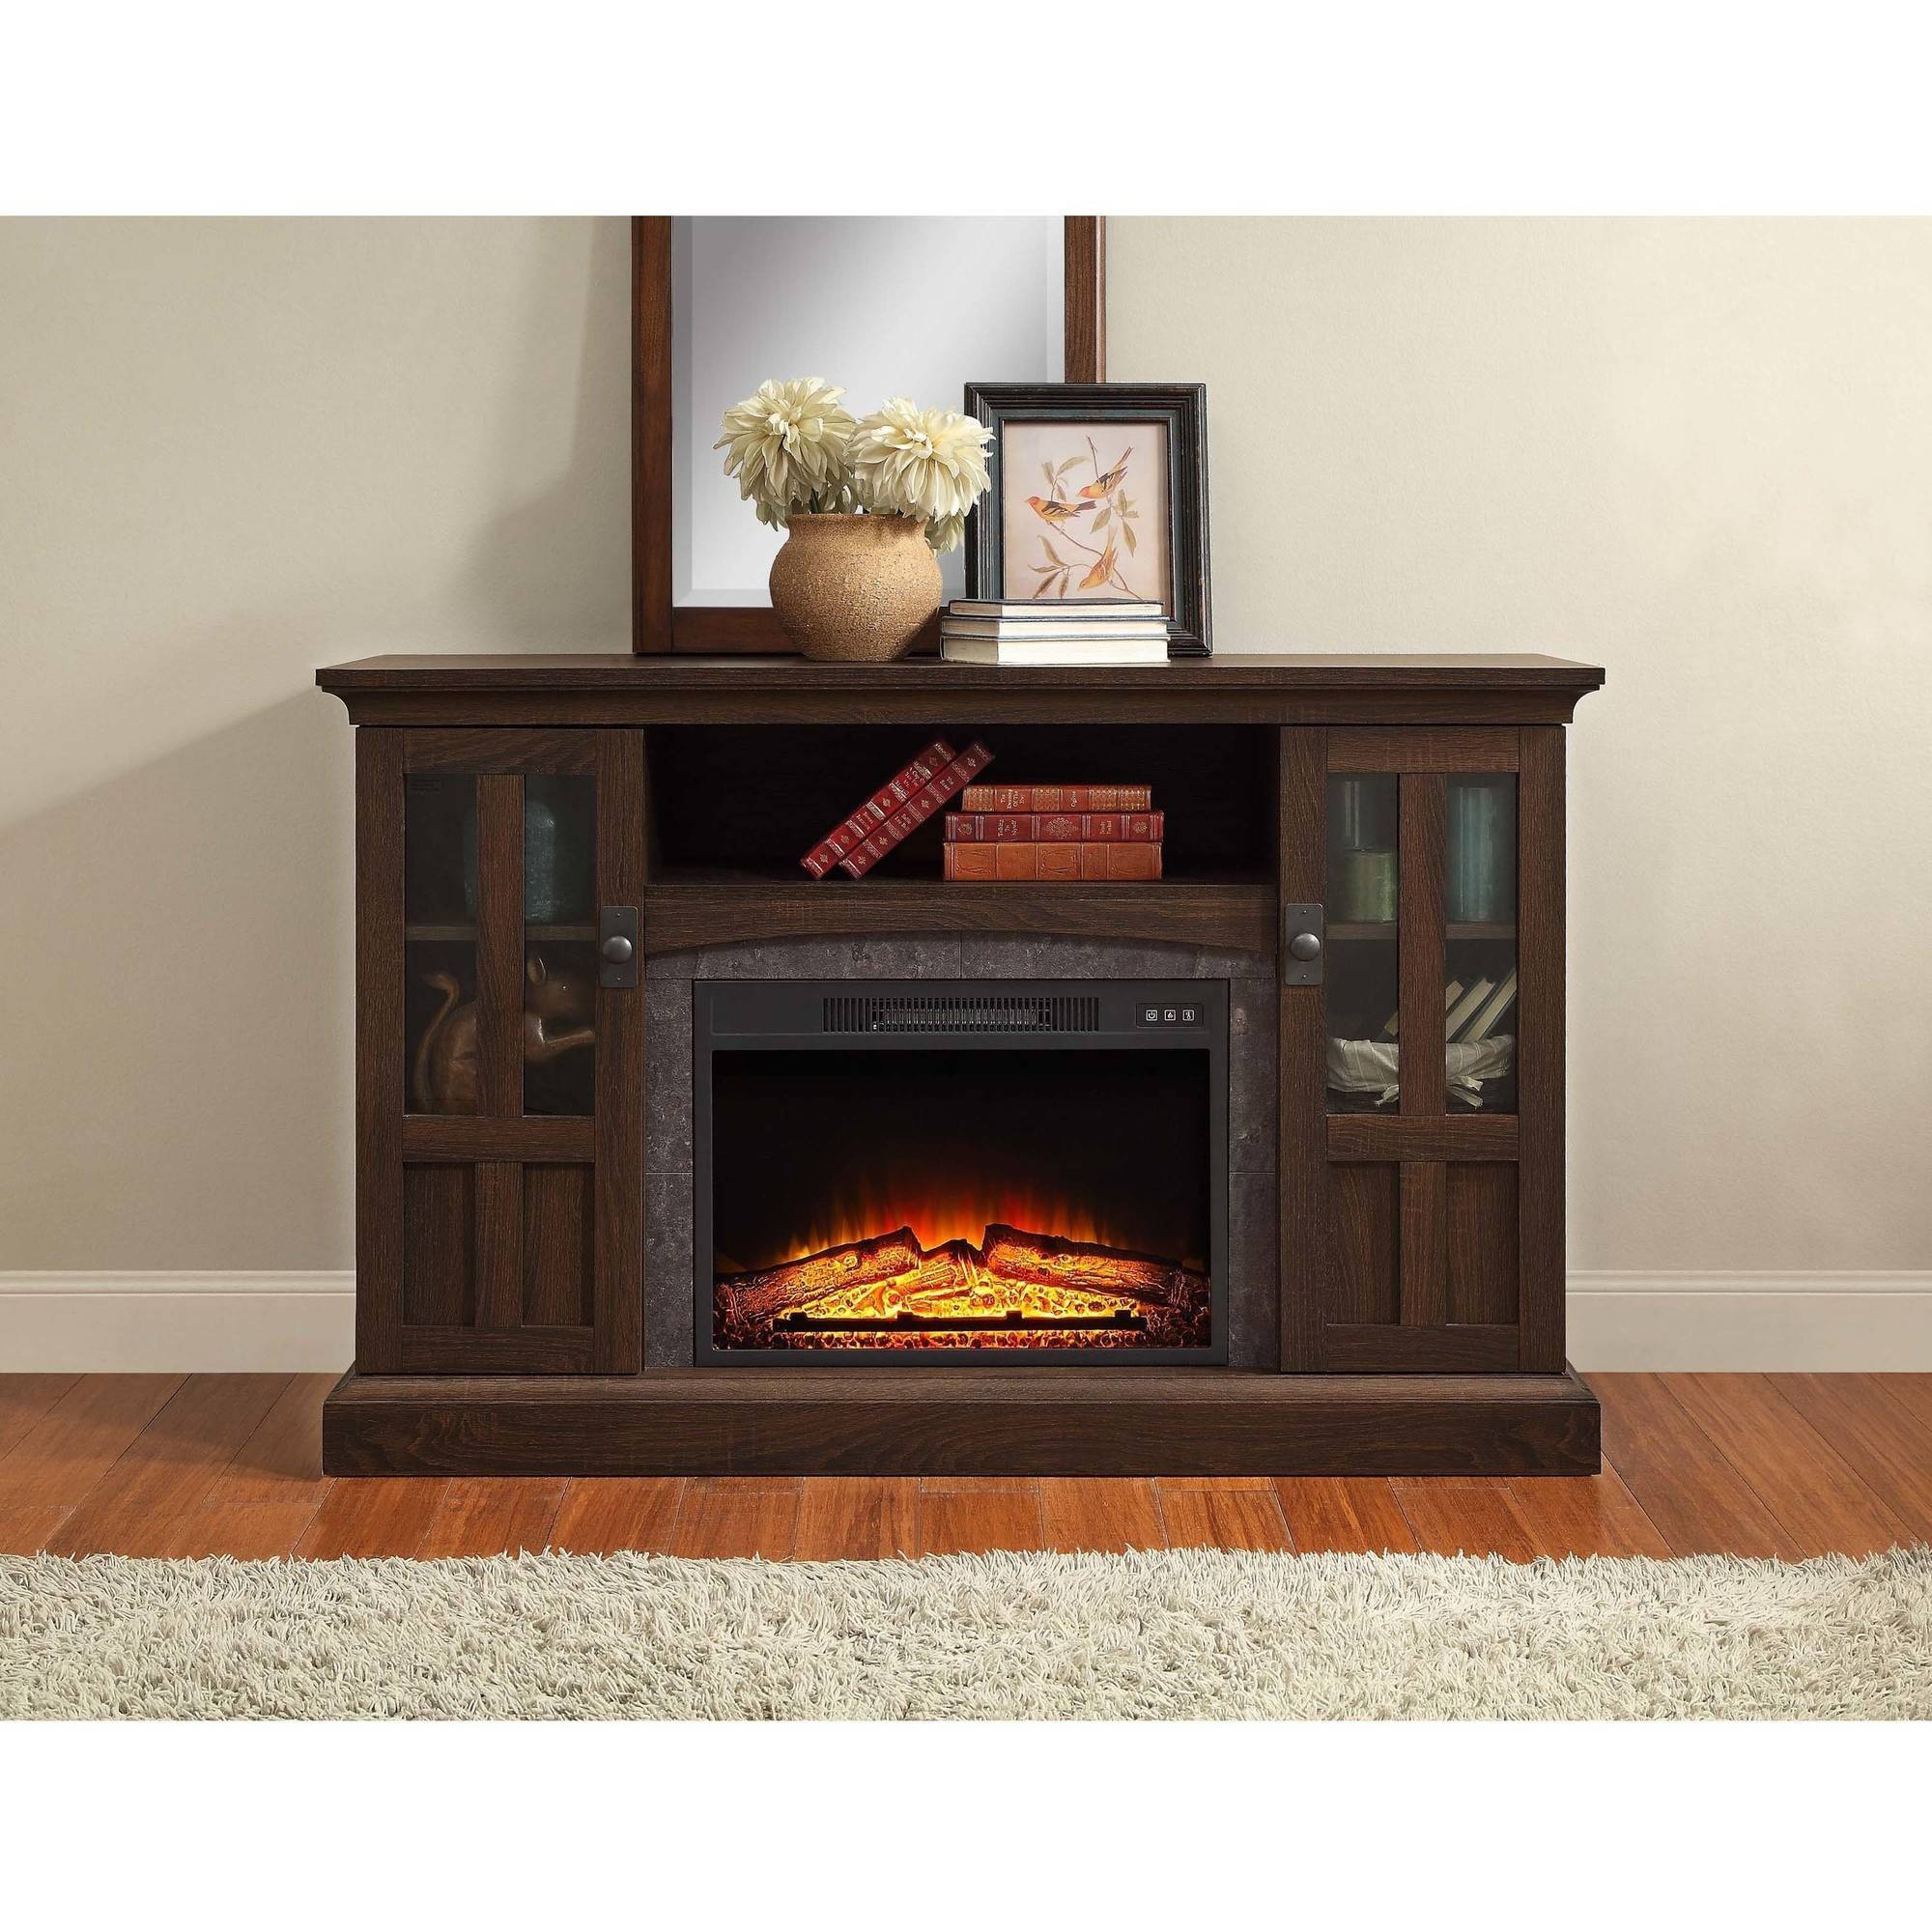 26 Recommended Hardwood Floor Fireplace Transition 2024 free download hardwood floor fireplace transition of whalen media fireplace console for tvs up to 60 brown ash for whalen media fireplace console for tvs up to 60 brown ash walmart com